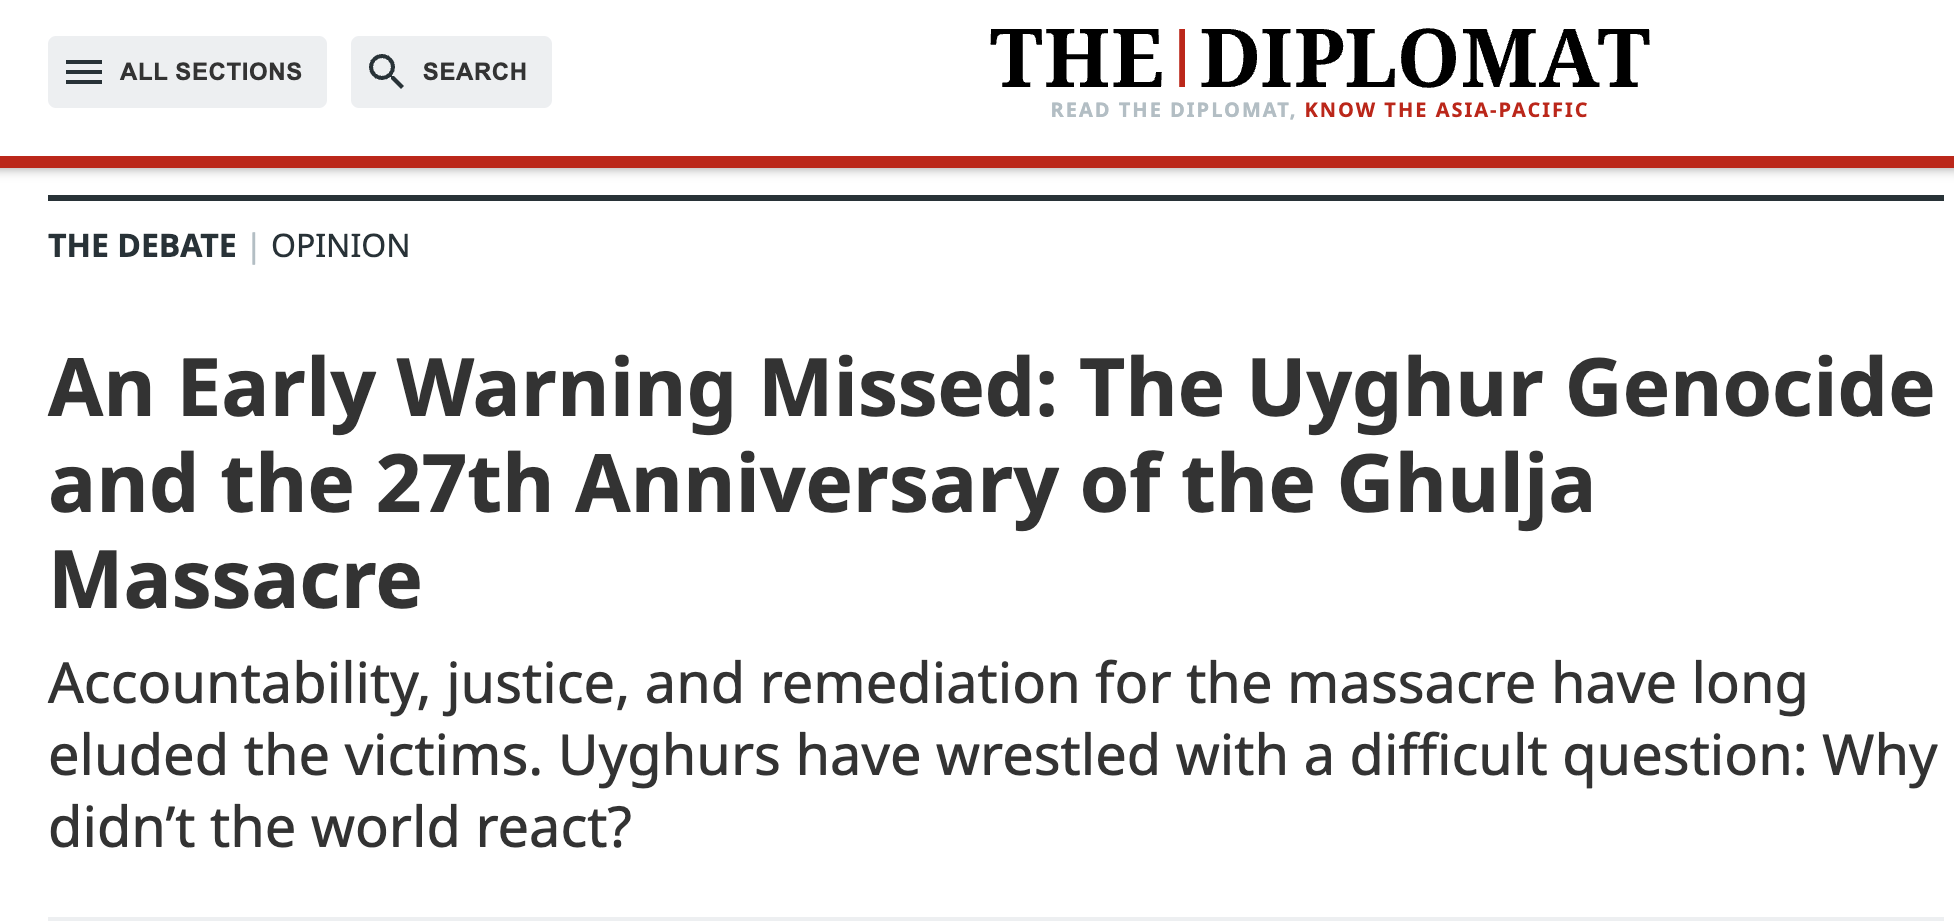 An Early Warning Missed: The Uyghur Genocide and the 27th Anniversary of the Ghulja Massacre